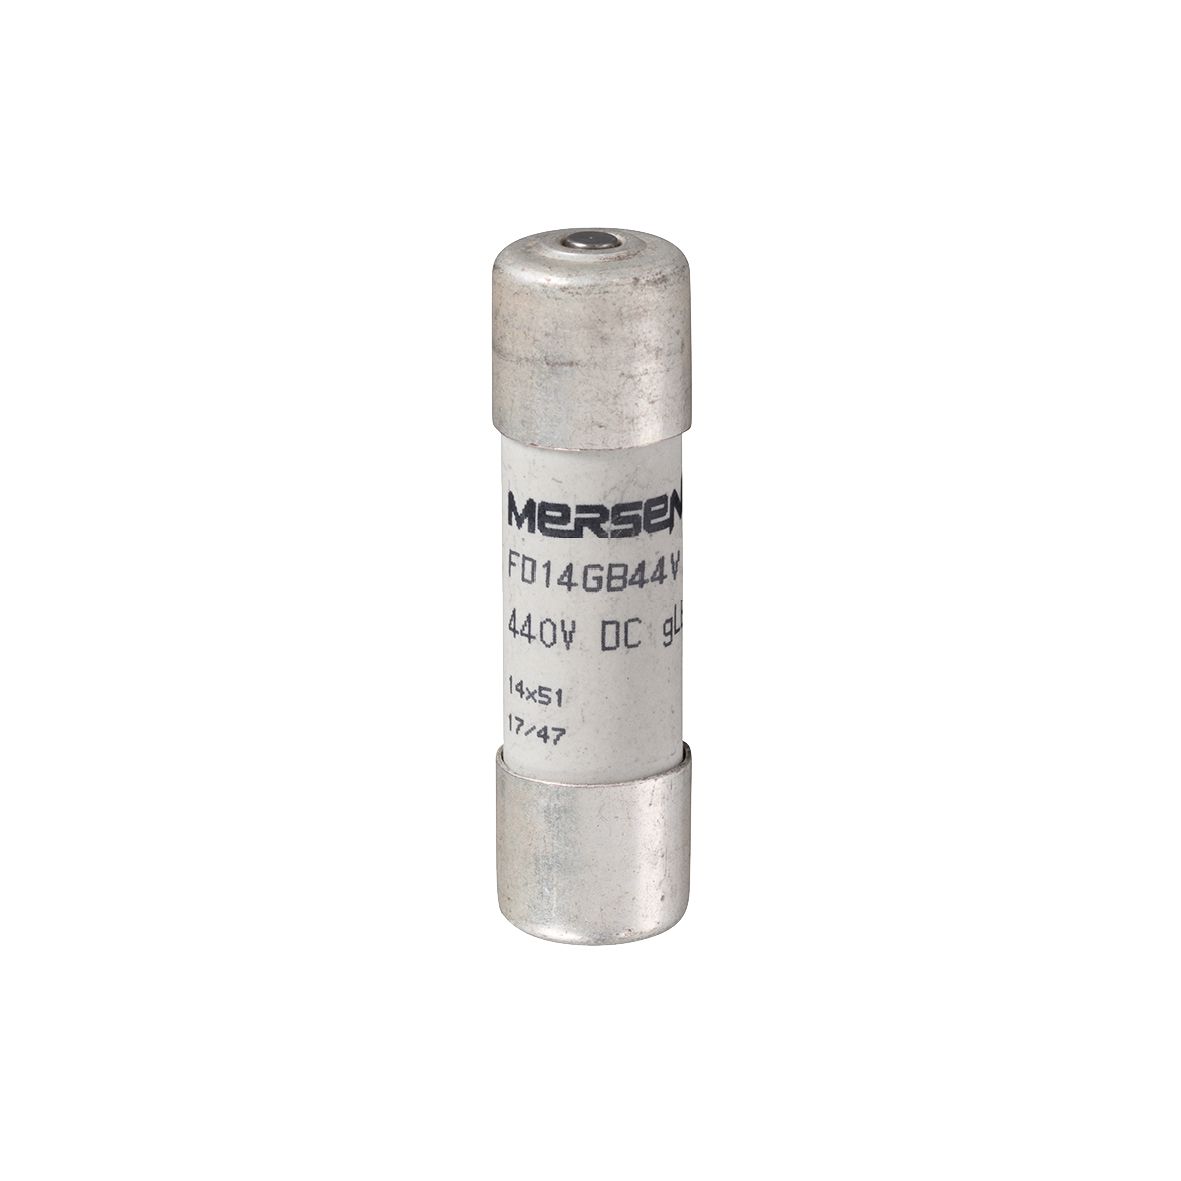 L221132 - Cylindrical fuse-link GRB 440VDC 14x51, 20A with striker